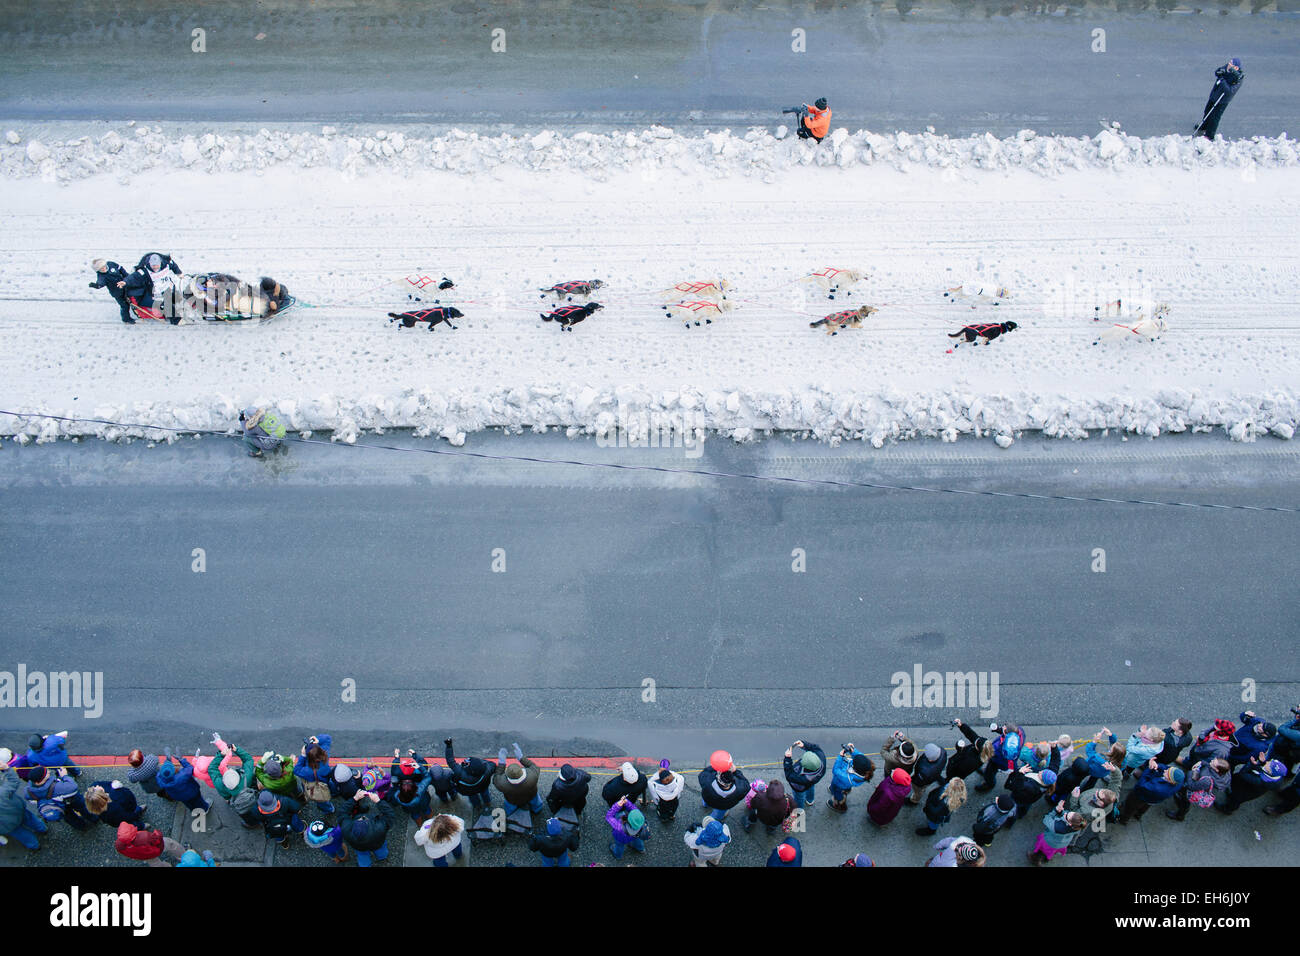 Scott Janssen, known as the 'Mushin' Mortician,' waves to the crowd as he mushes down Fourth Avenue in Anchorage Alaska at the Iditarod's Ceremonial Start on March 7, 2015. The race will resume with the official start in Fairbanks on March 9. Photo: Joshua Corbett/dpa (zu dpa: Alaska, Land des Hechelns: «Das härteste Schlittenrennen der Welt» vom 08.03.2015) Stock Photo